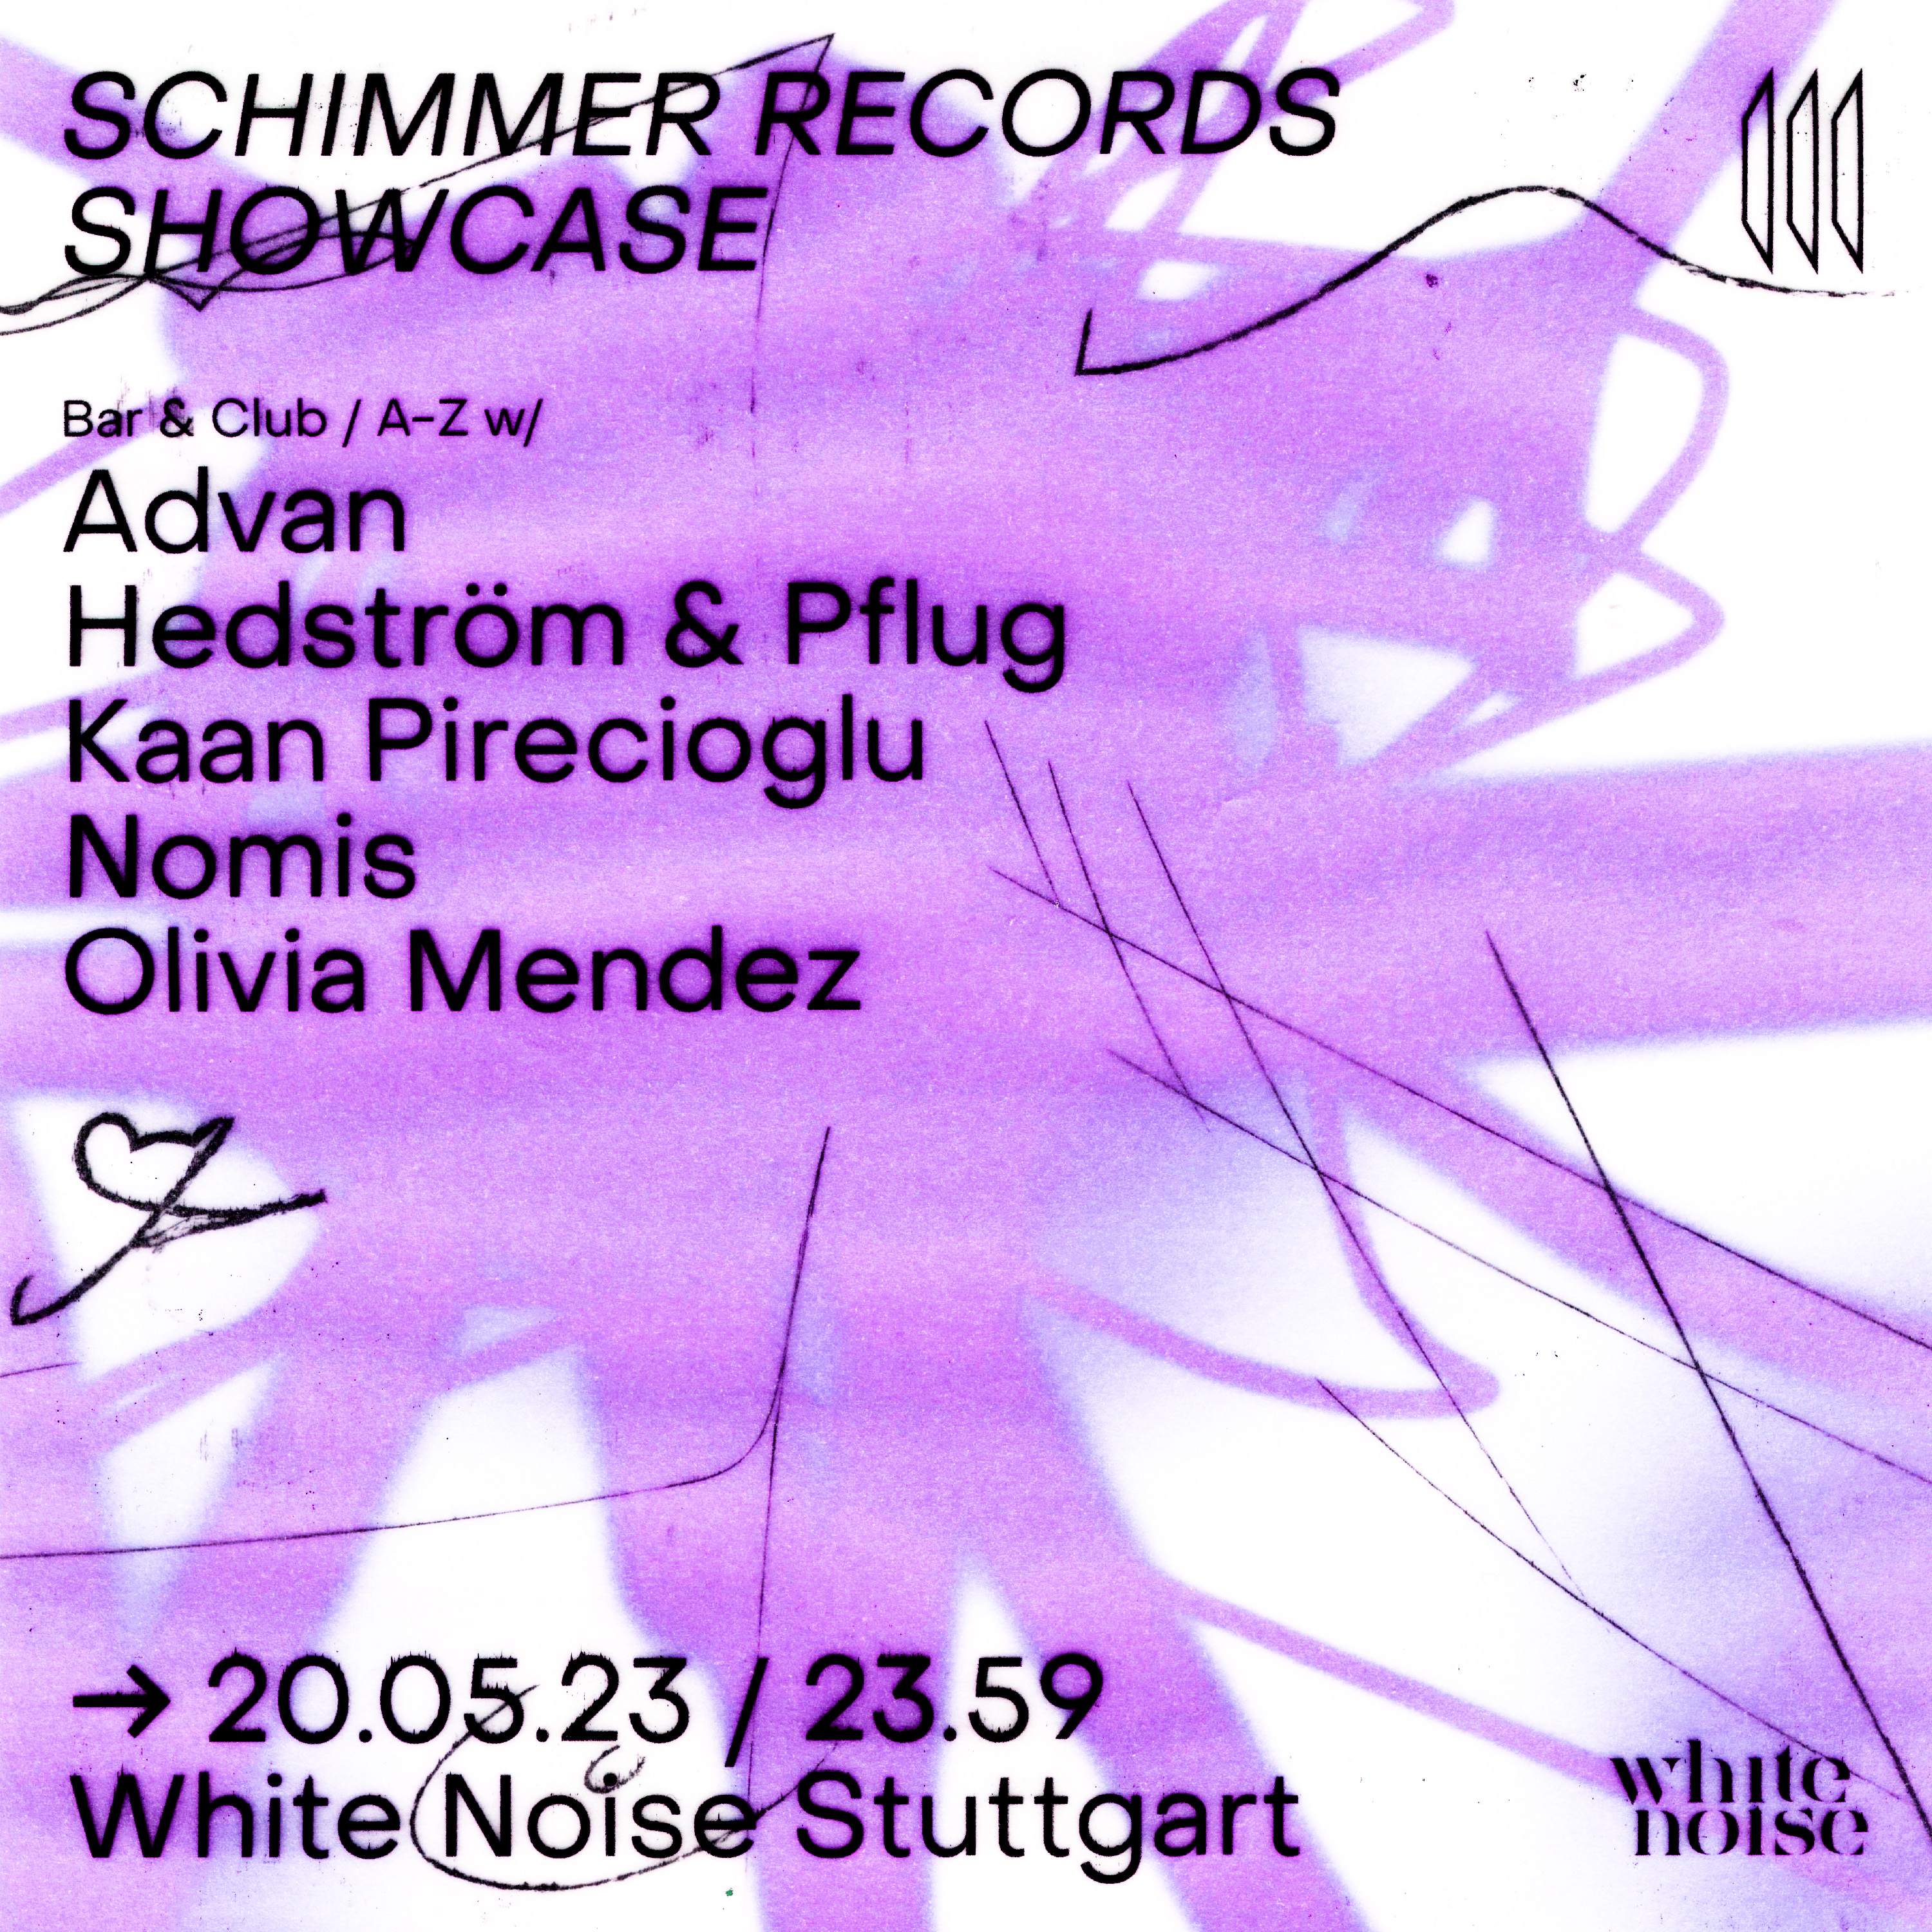 Schimmer Records Showcase with Olivia Mendez - Página frontal